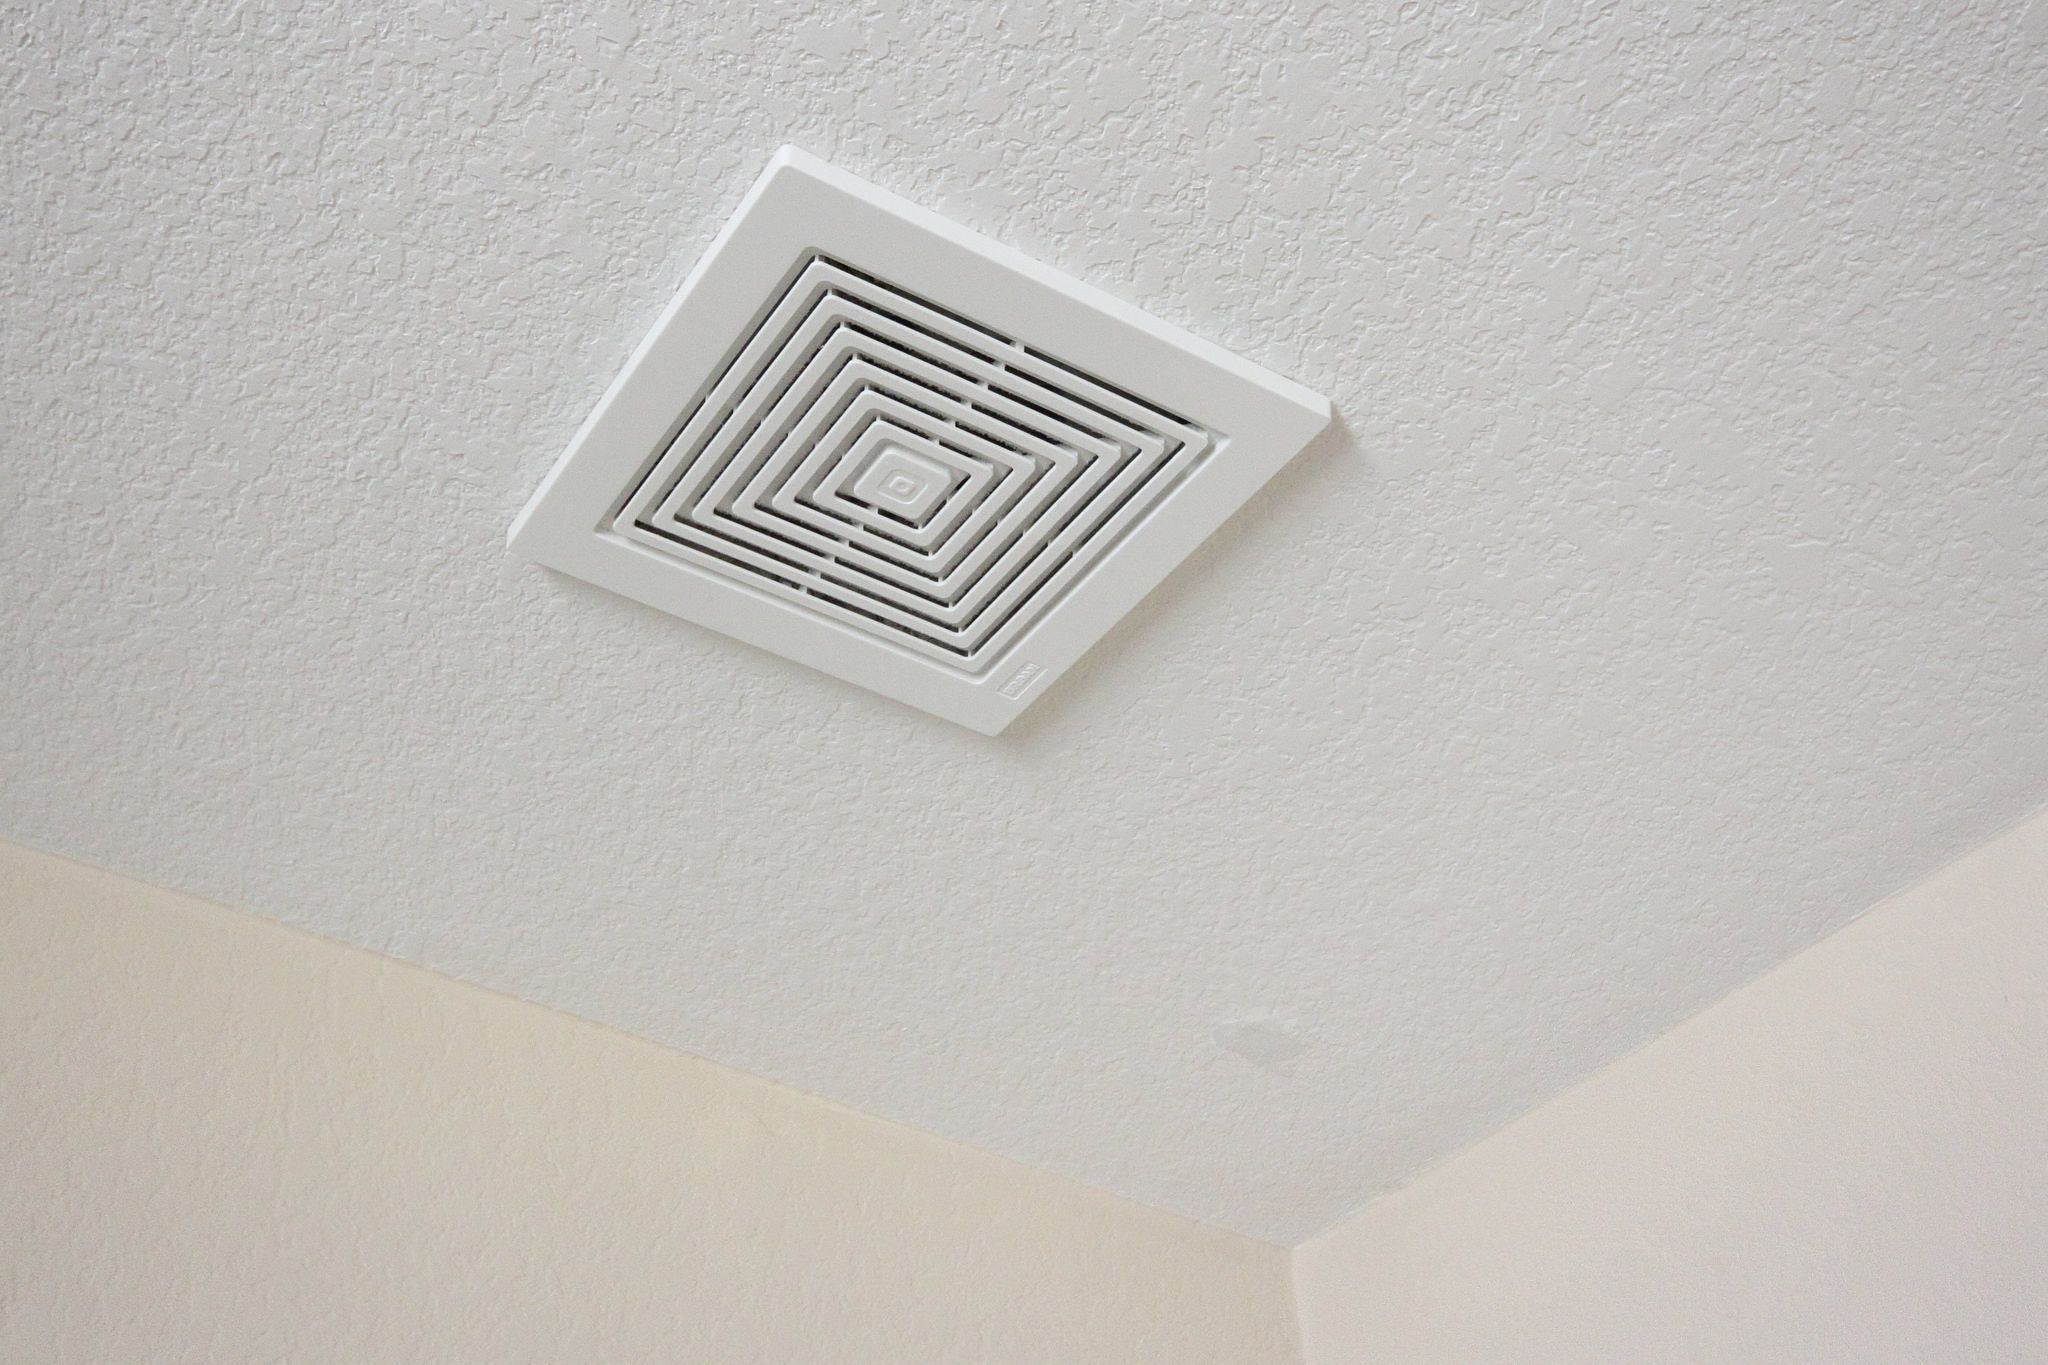 Installing A Bathroom Exhaust Fan
 How to Install a Bathroom Exhaust Fan